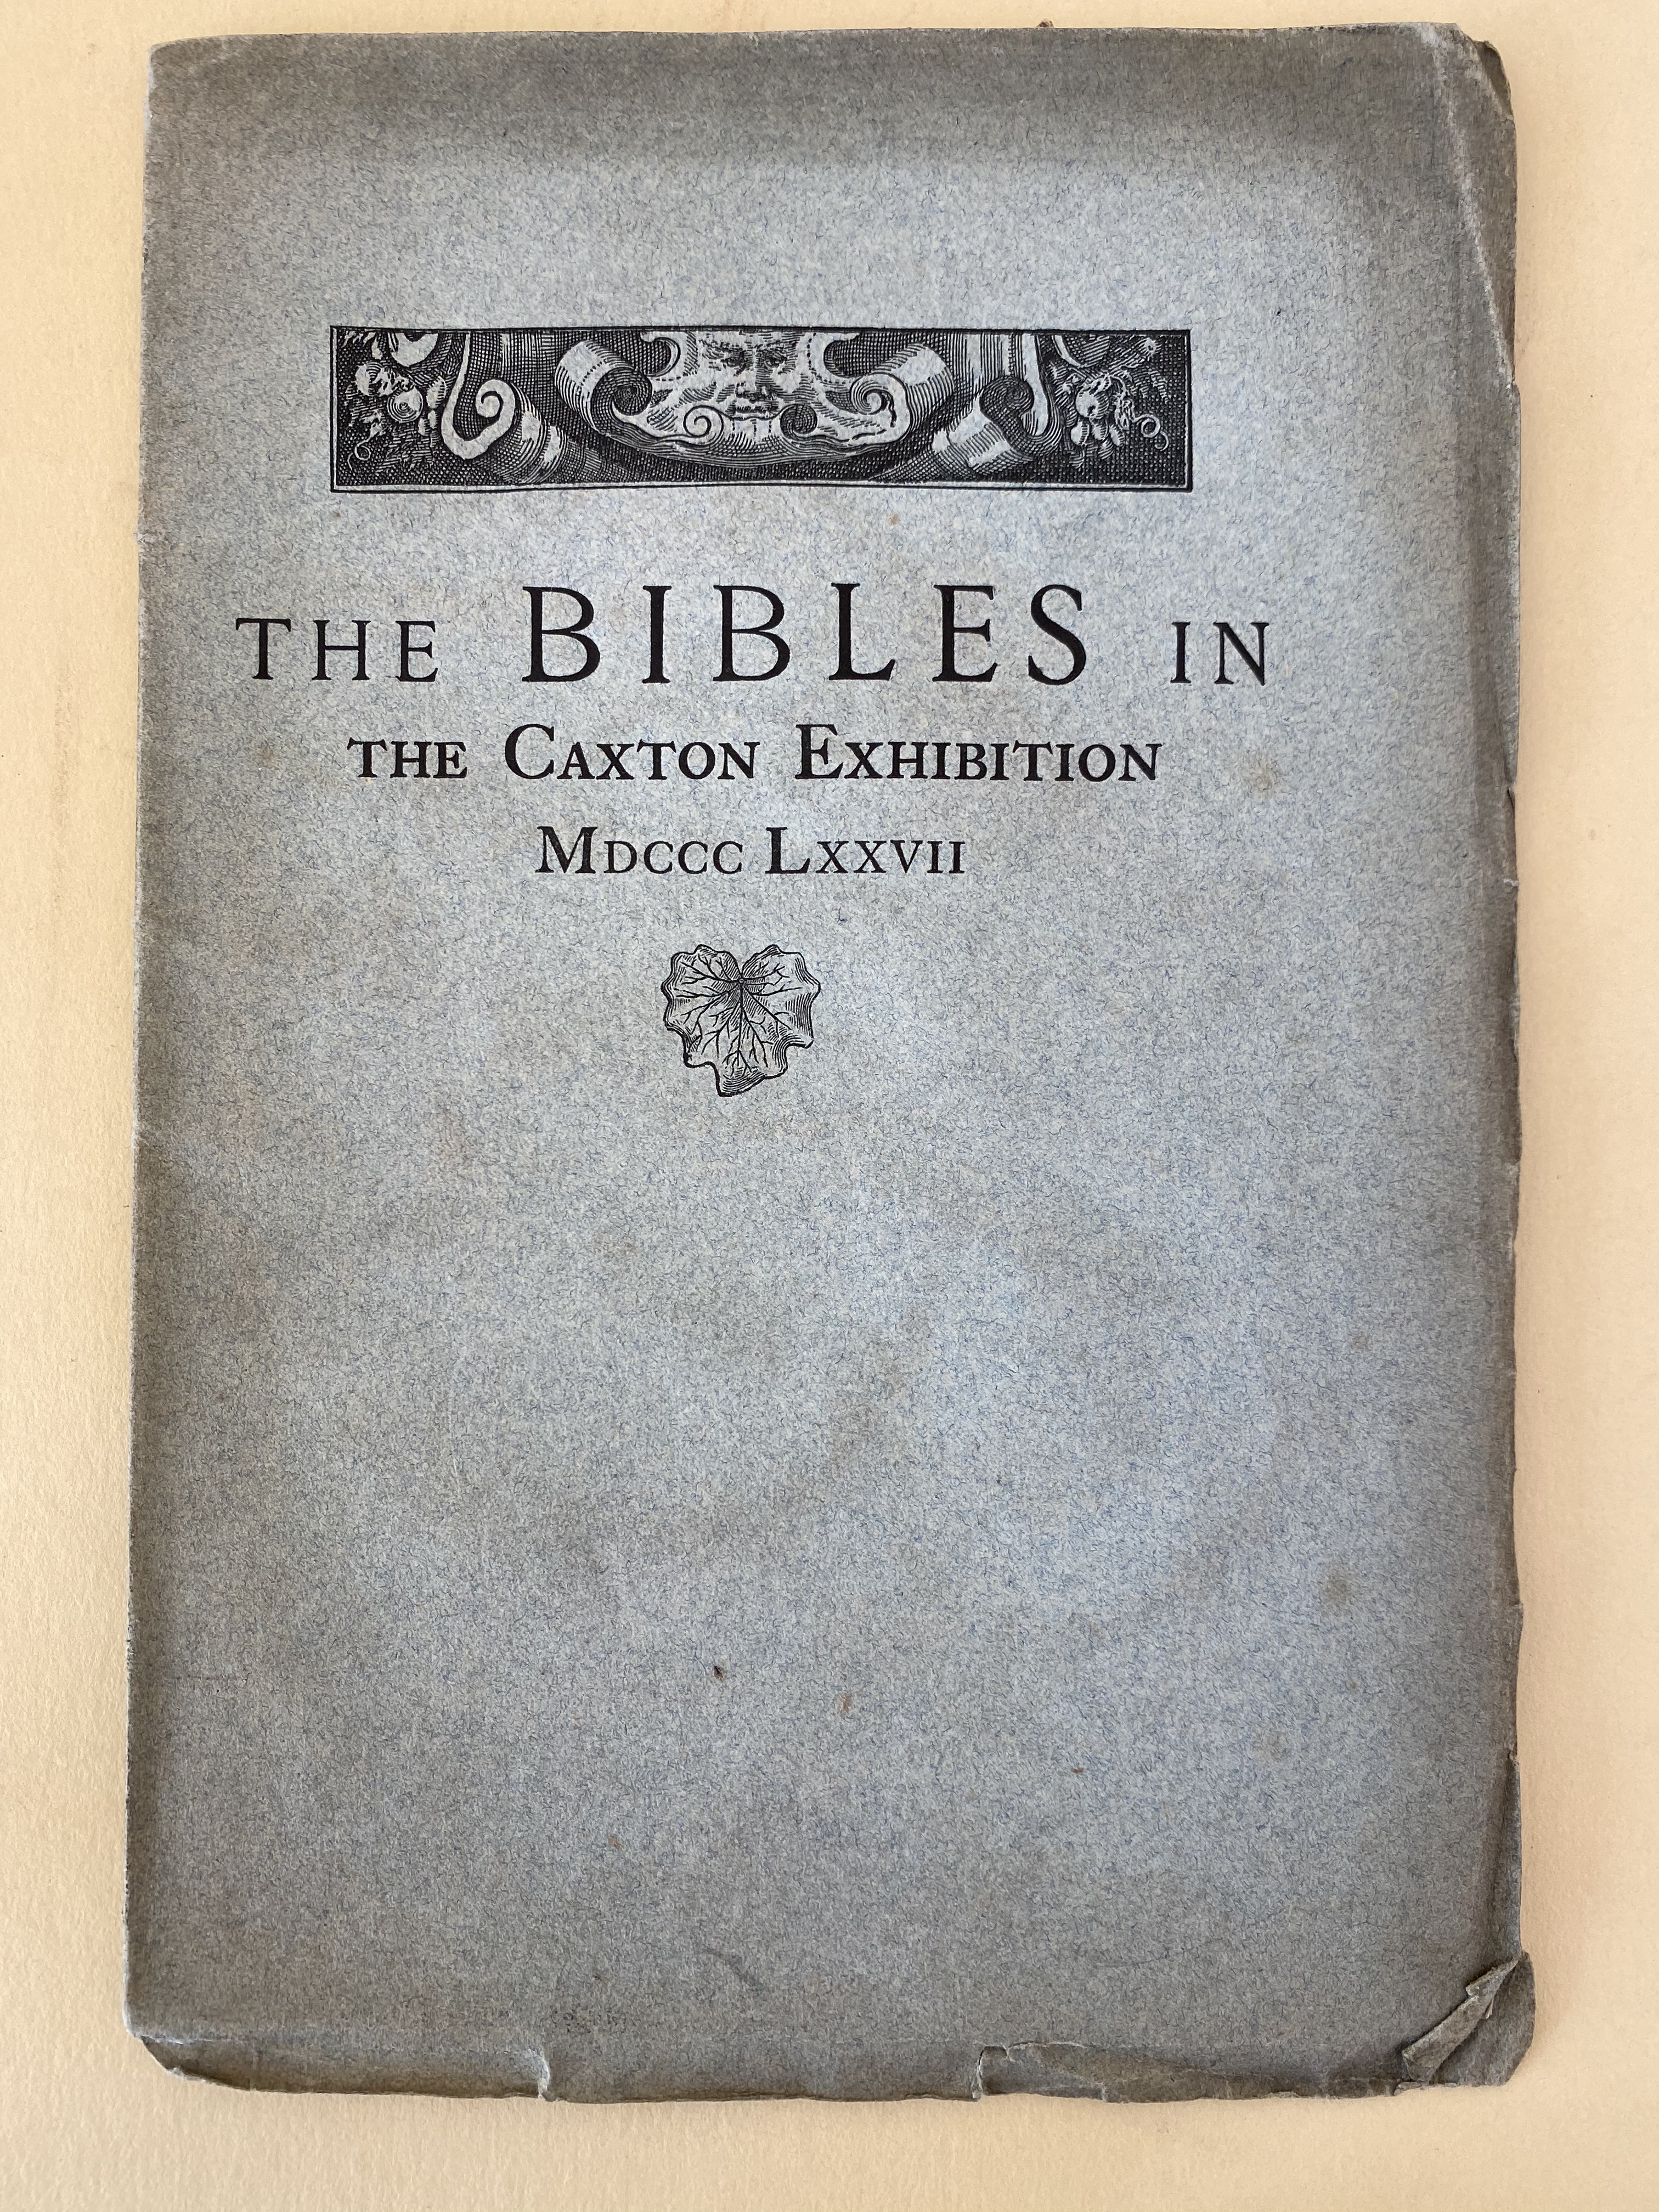 Stevens Bibles in the Caxton Exhibition